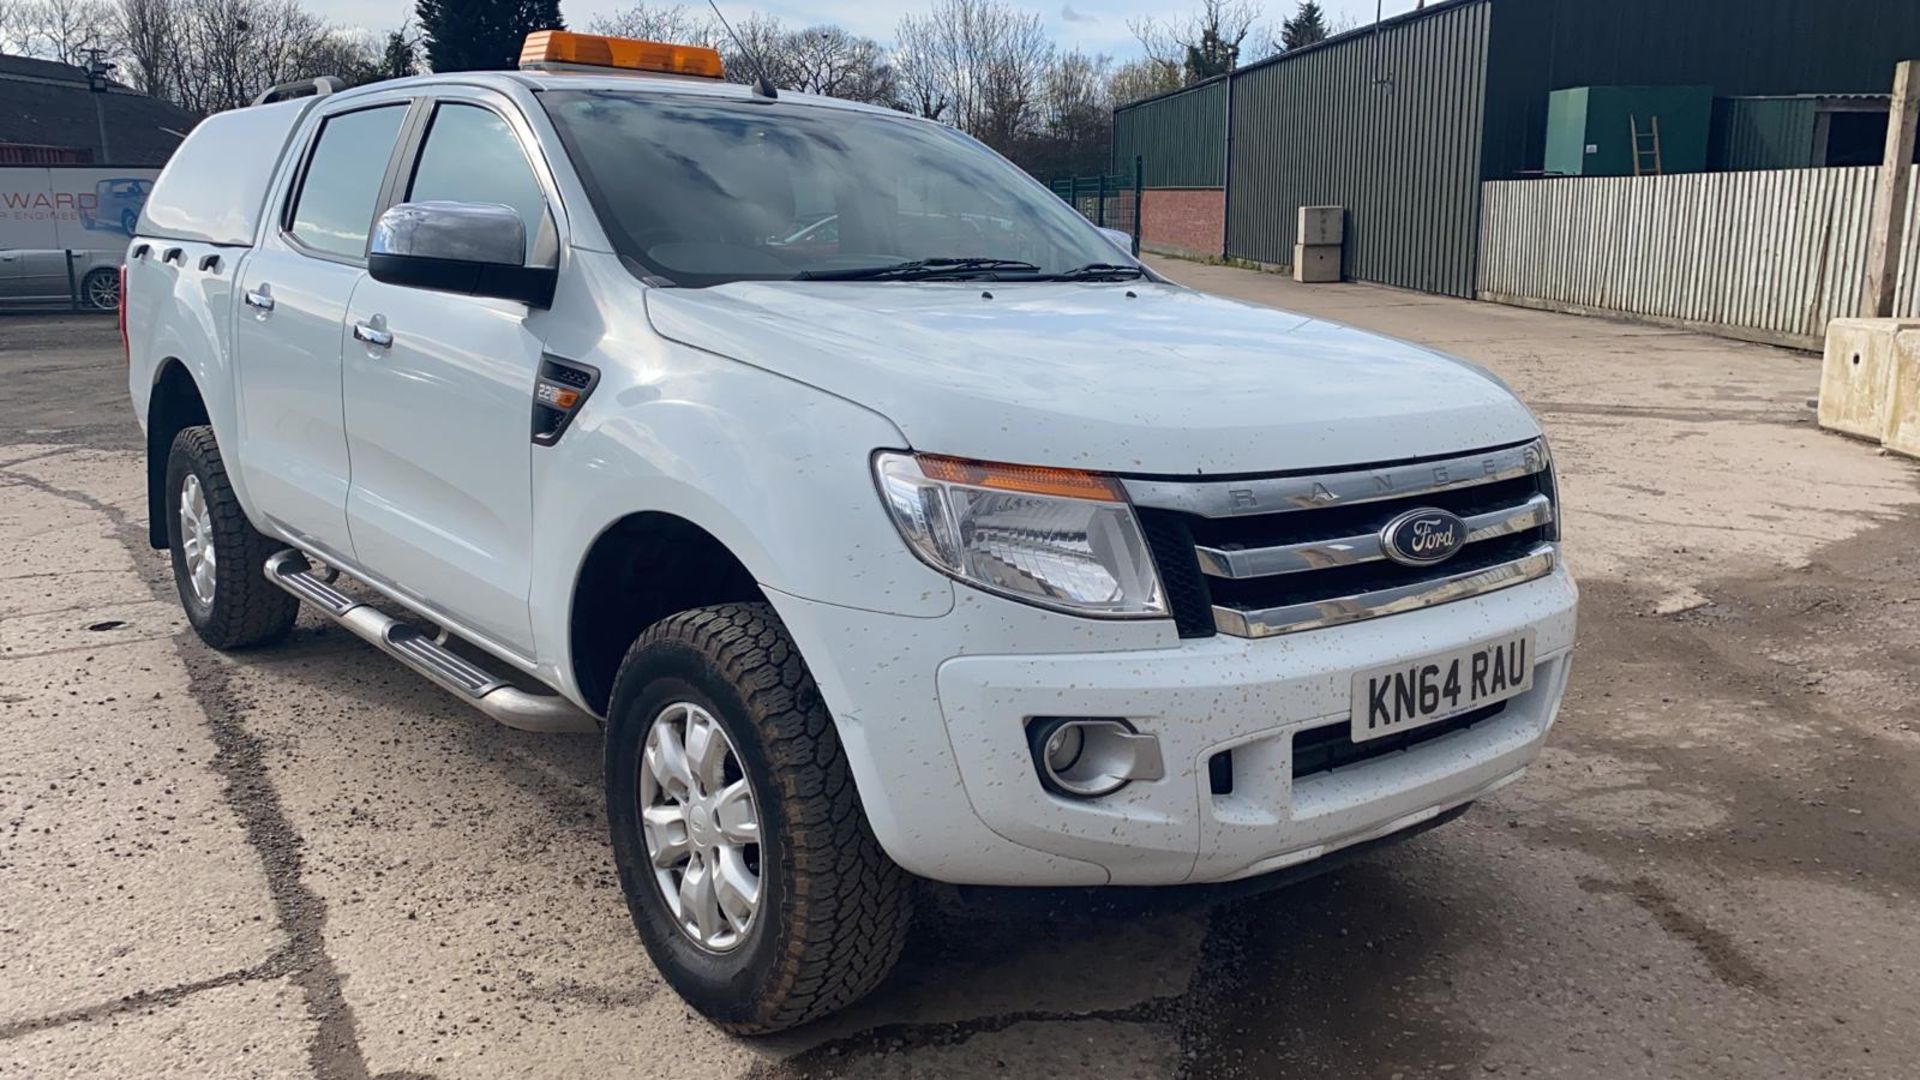 (RESERVE MET) Ford Ranger 2.2 TDCI XLT Double Cab 4x4 - 2015 Model - Service History - Tow Bar - Image 3 of 17